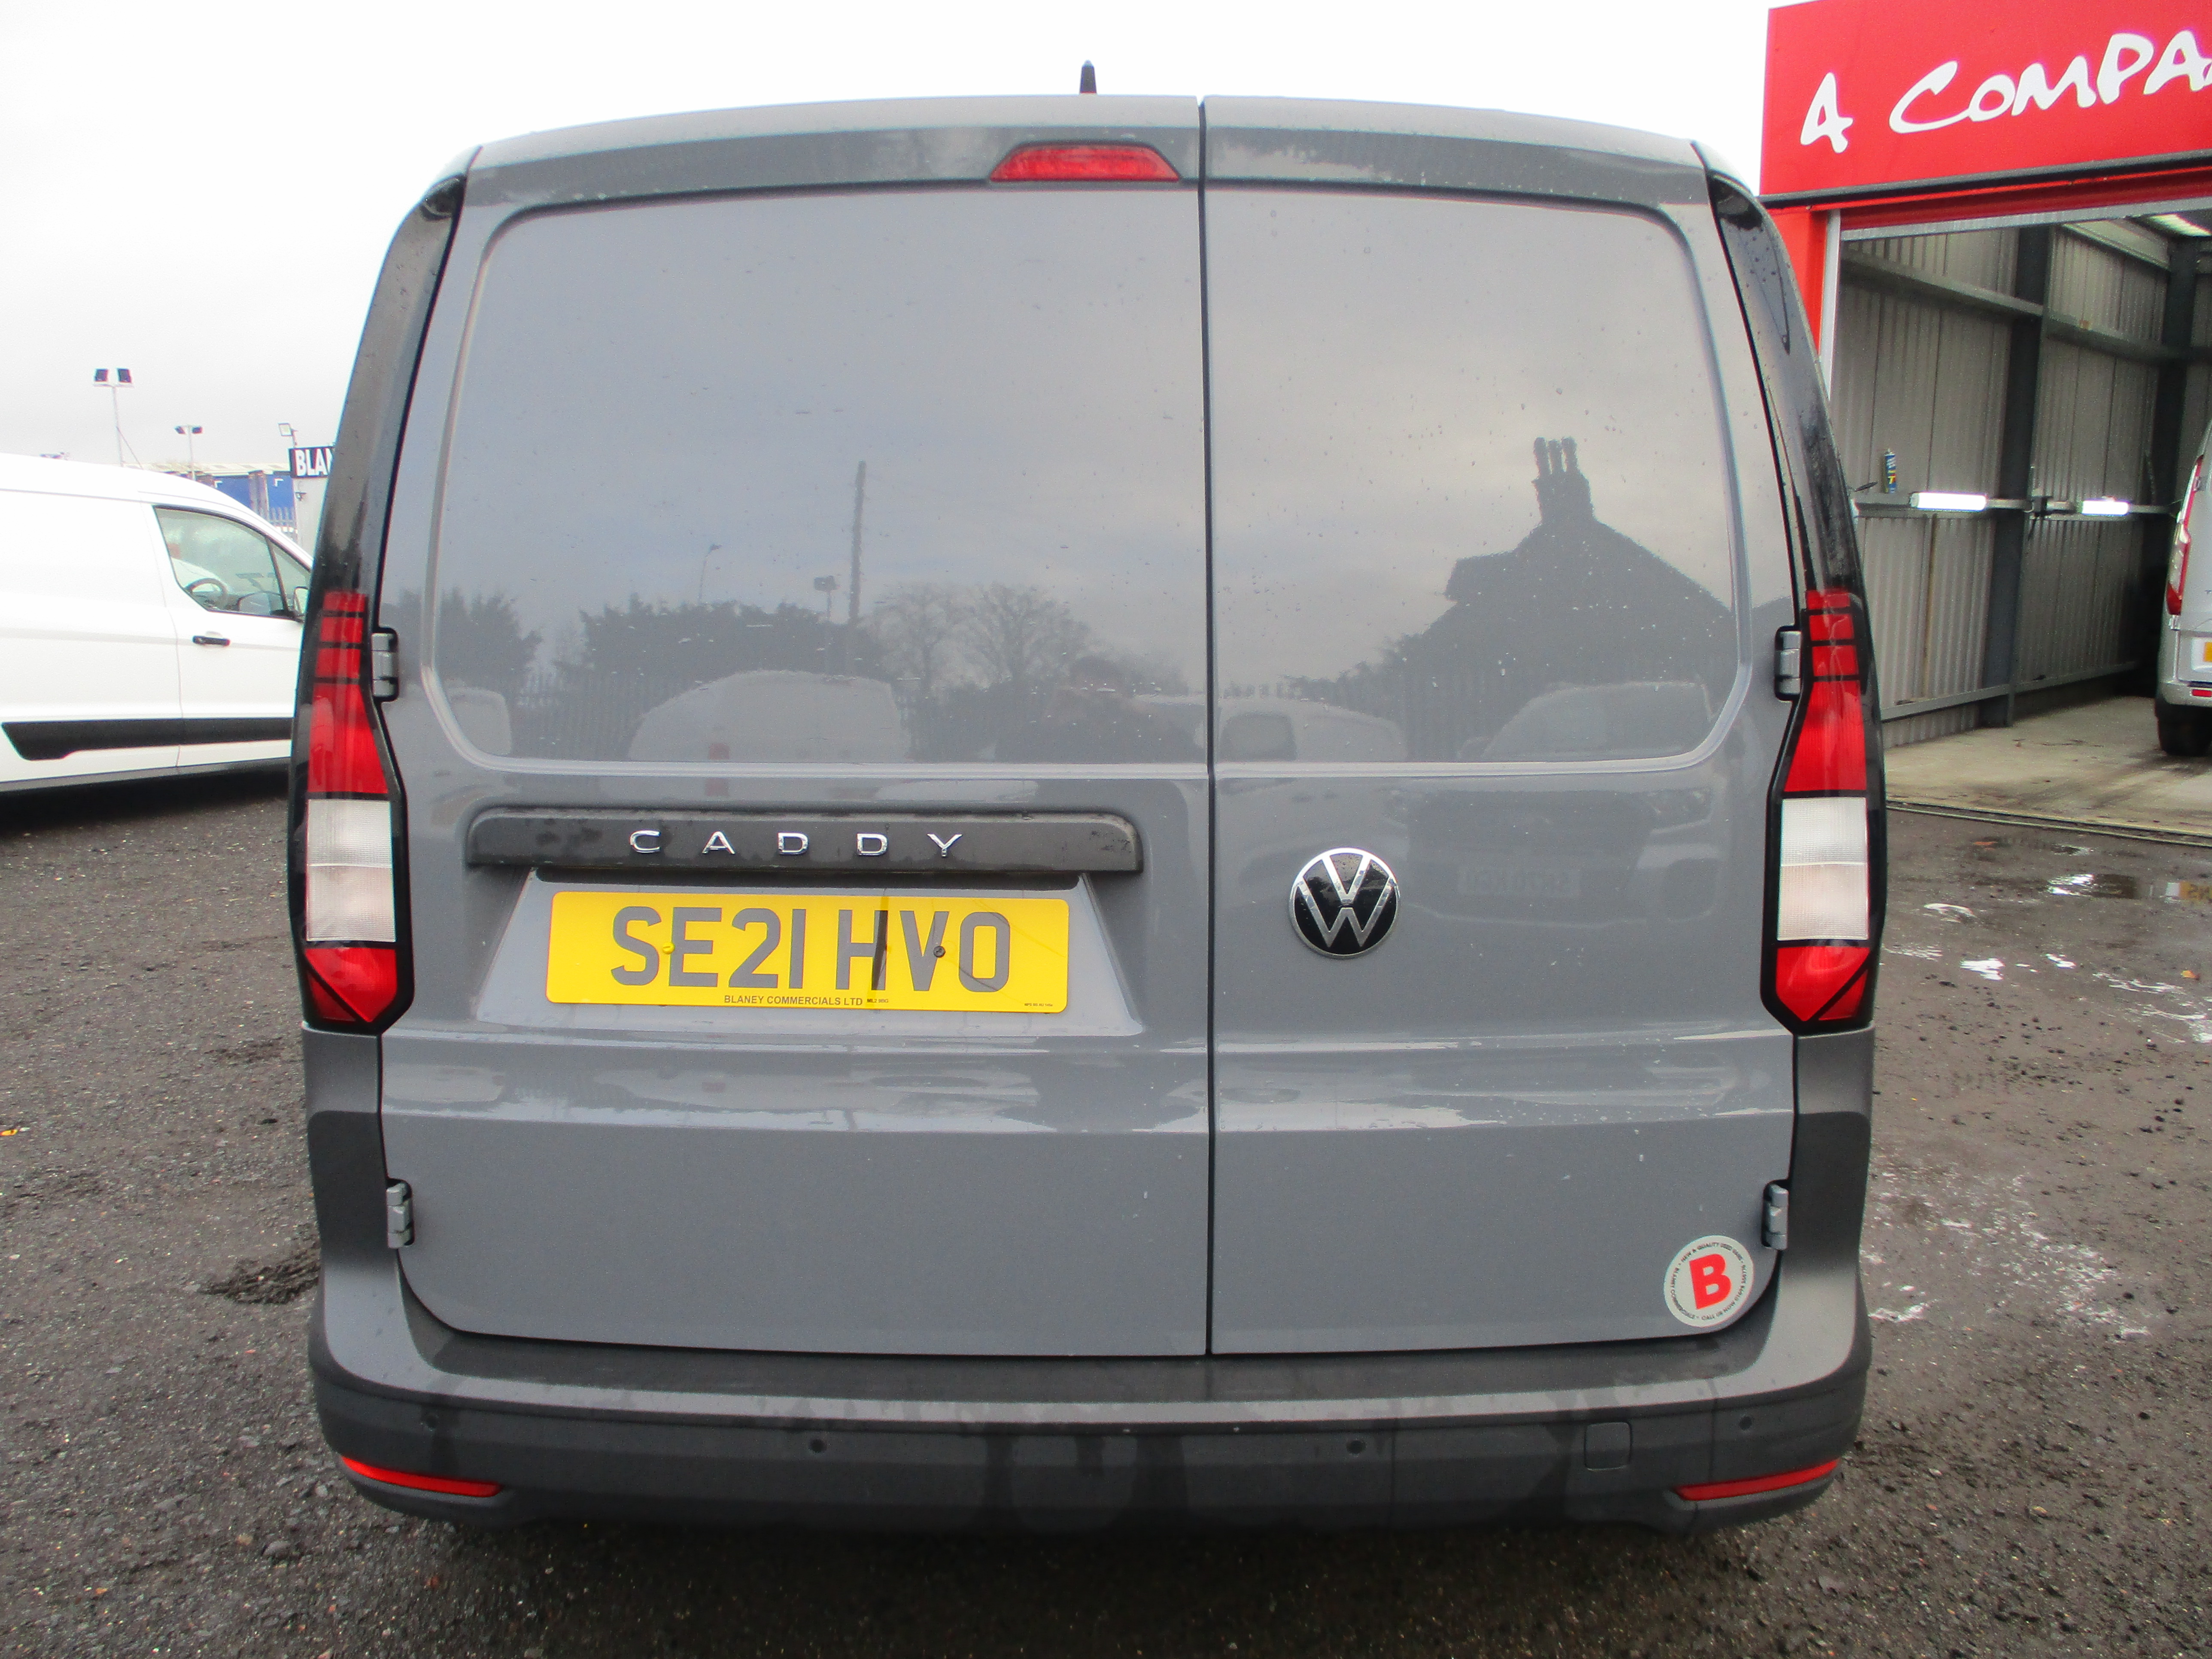 Volkswagen Caddy C20 2.0TDi 102PS Commerce Panel Van with Business Pack including Air Con (VW COLOUR PURE GREY LOVELY IN THE NEW CADDY)